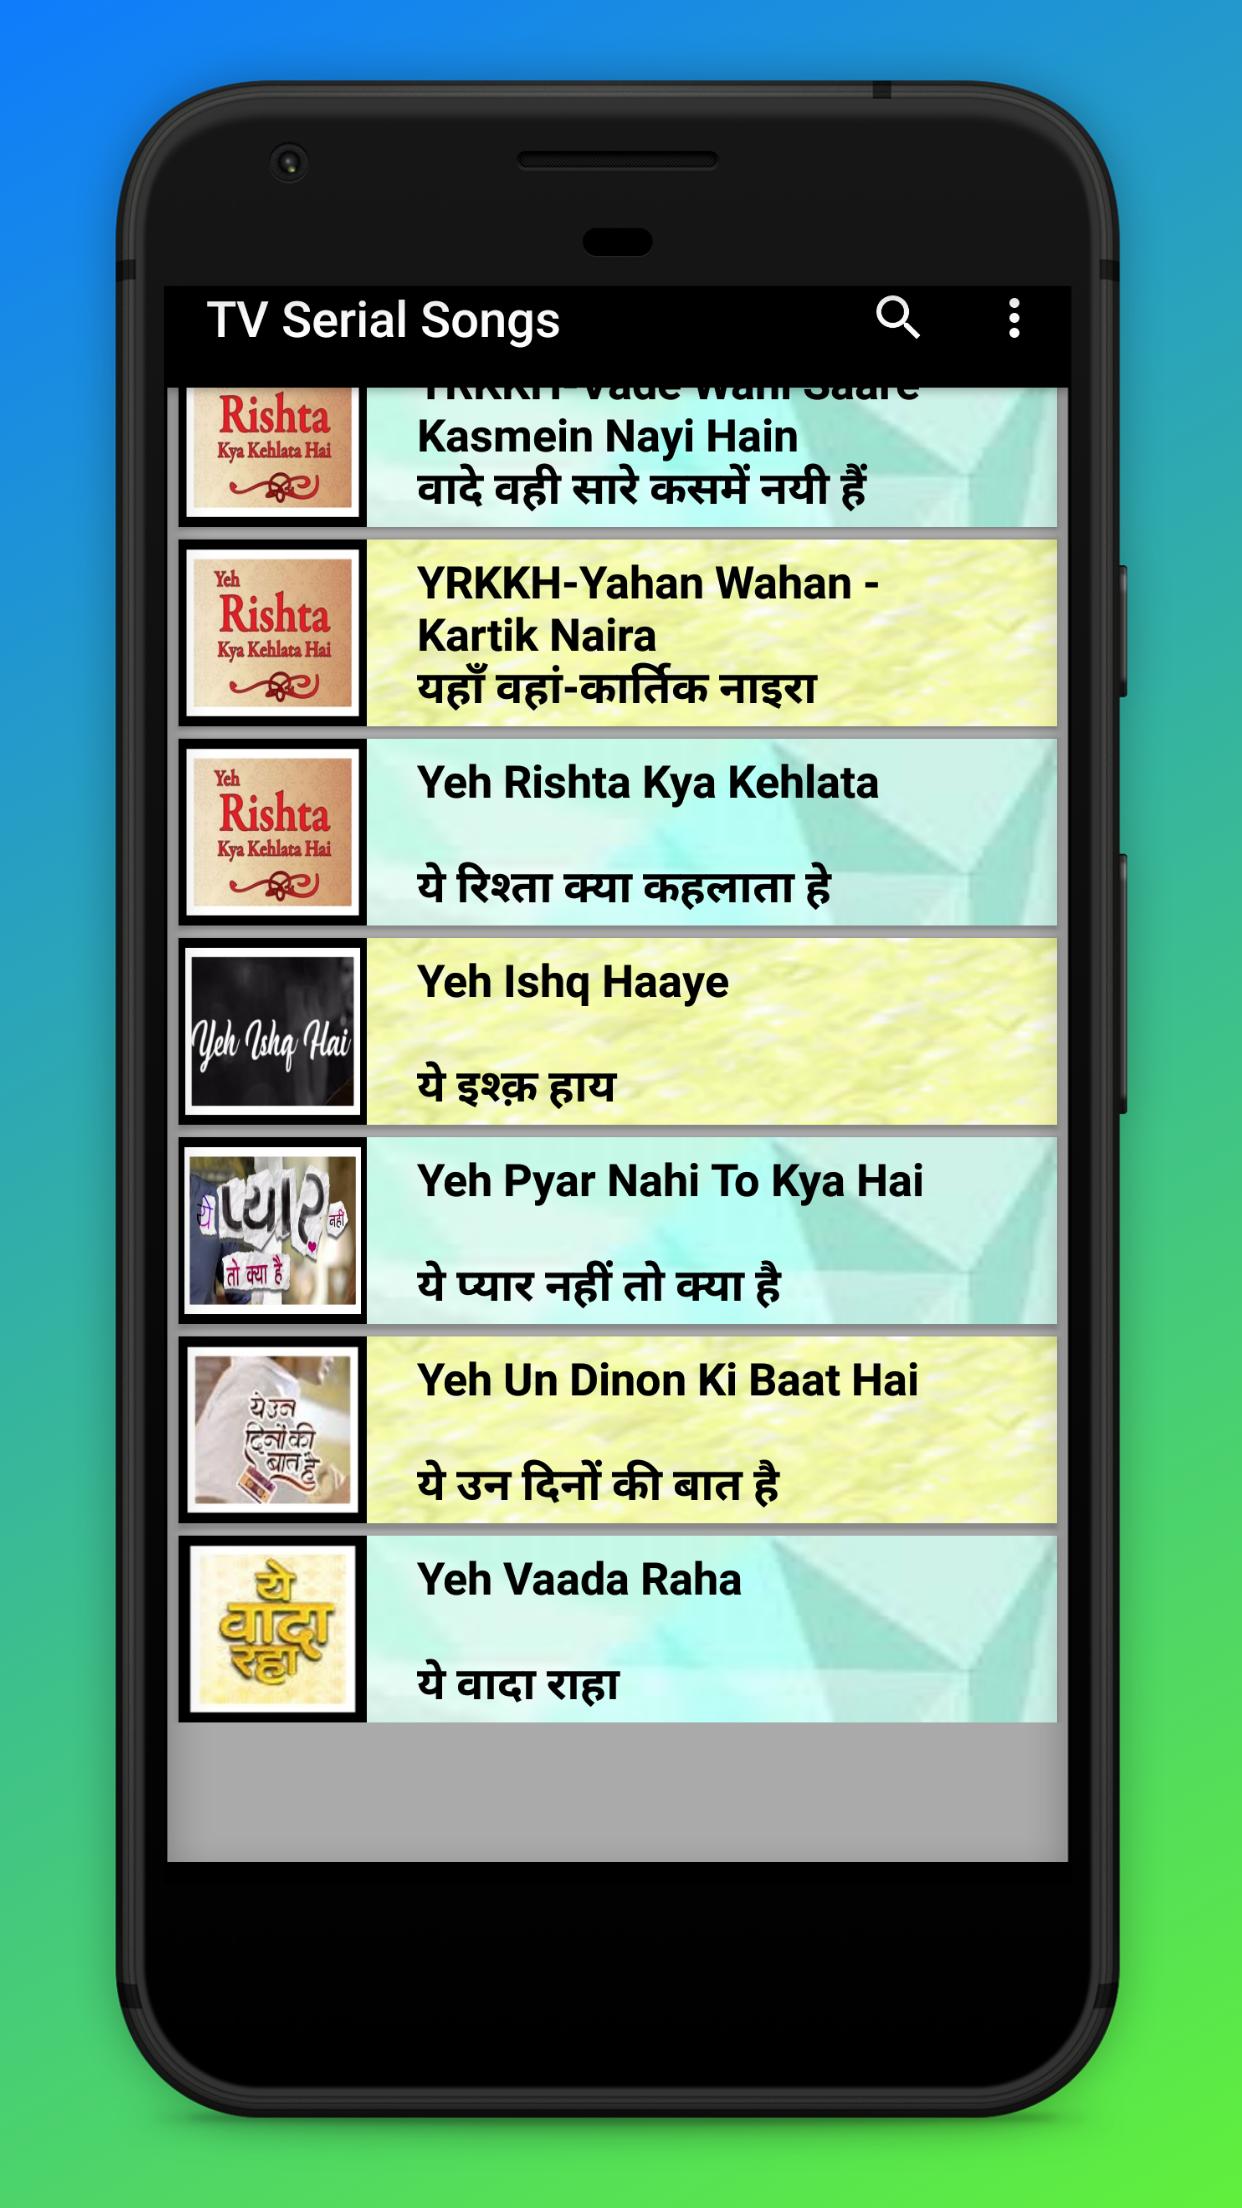 TV Serial Songs for Android - APK Download